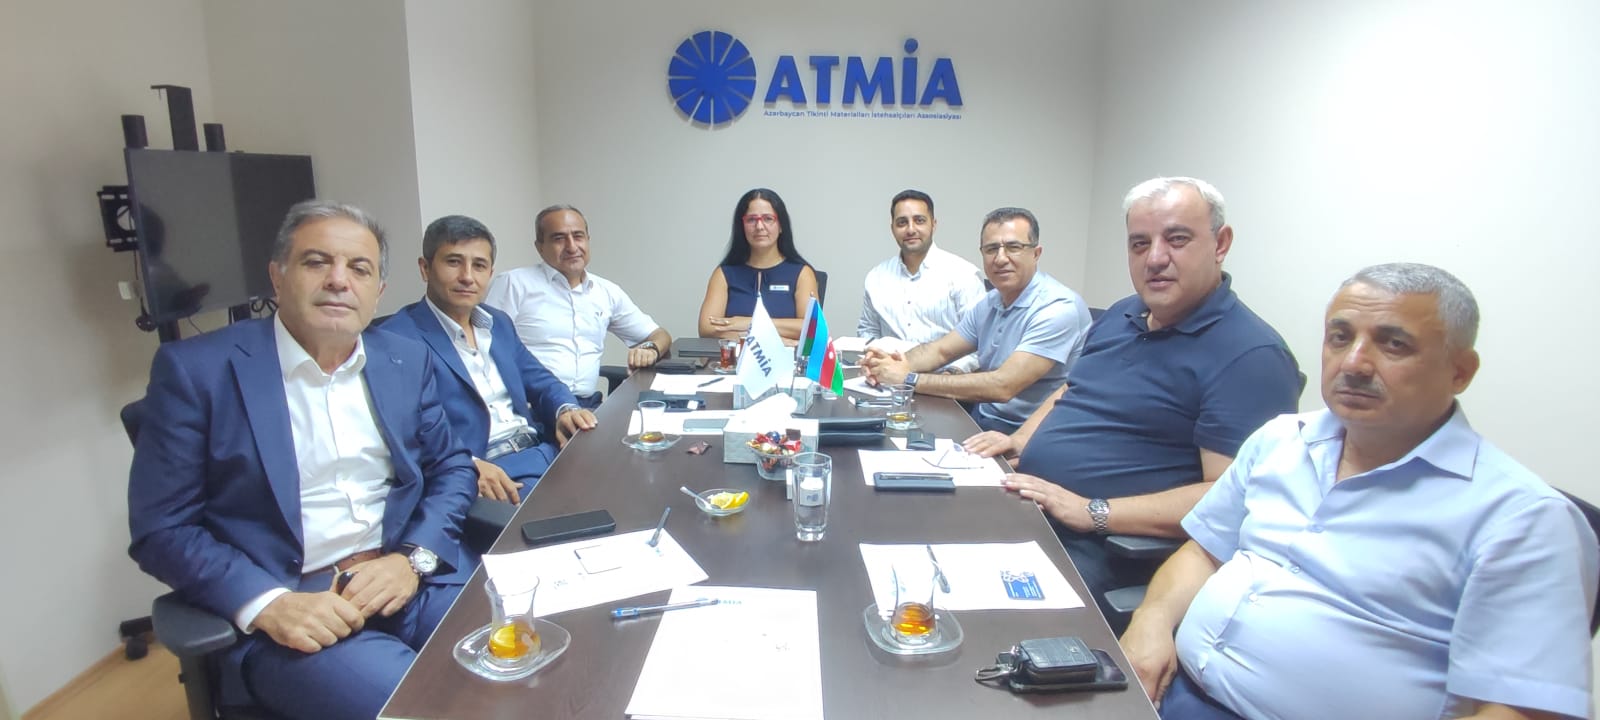 The first meeting of the ATMIA management board was held today